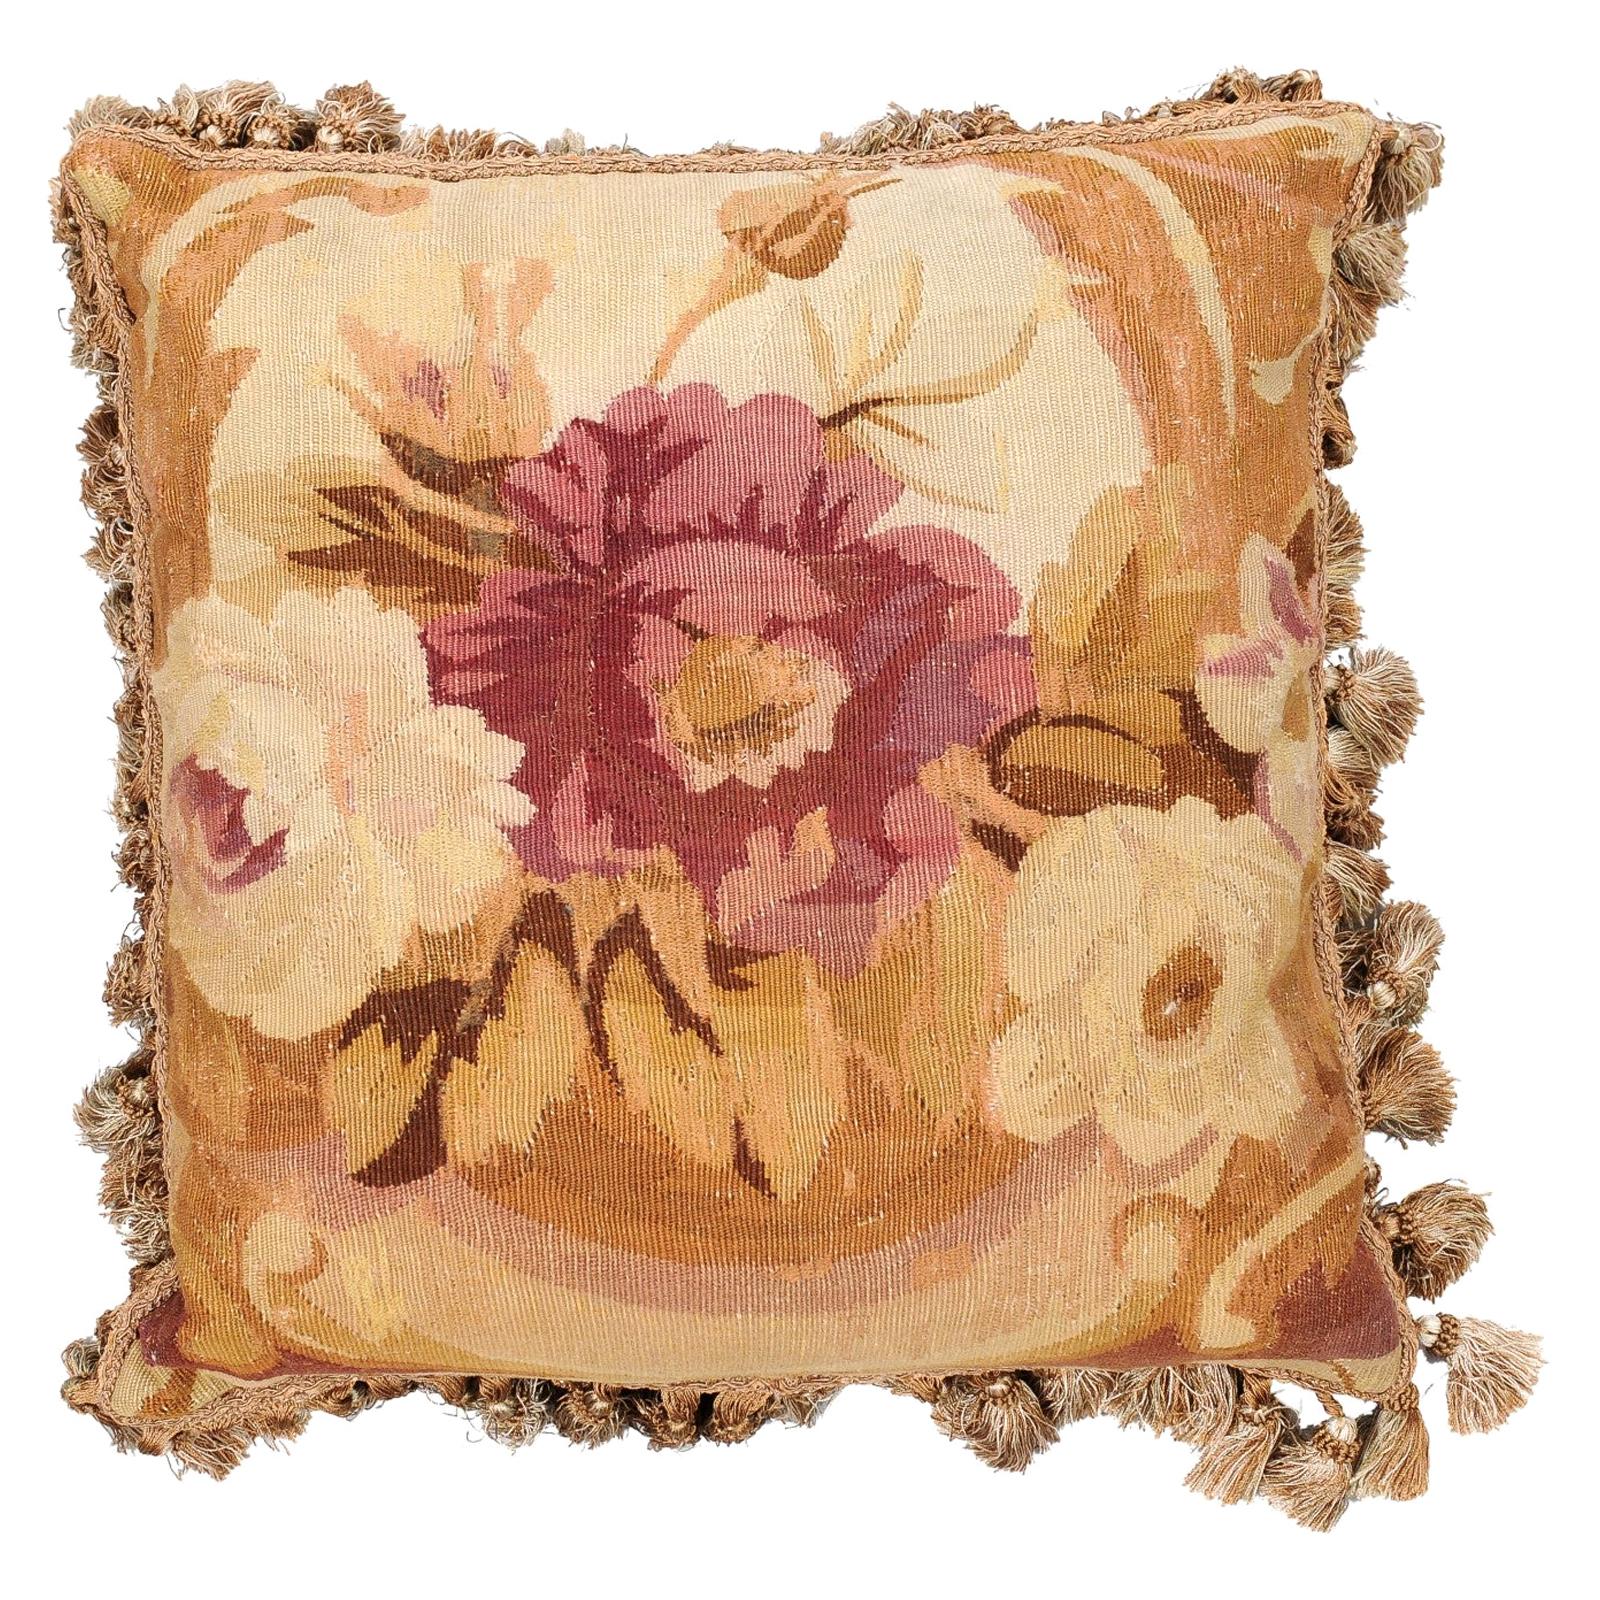 French 19th Century Aubusson Woven Tapestry Pillow with Roses Décor and Tassels For Sale